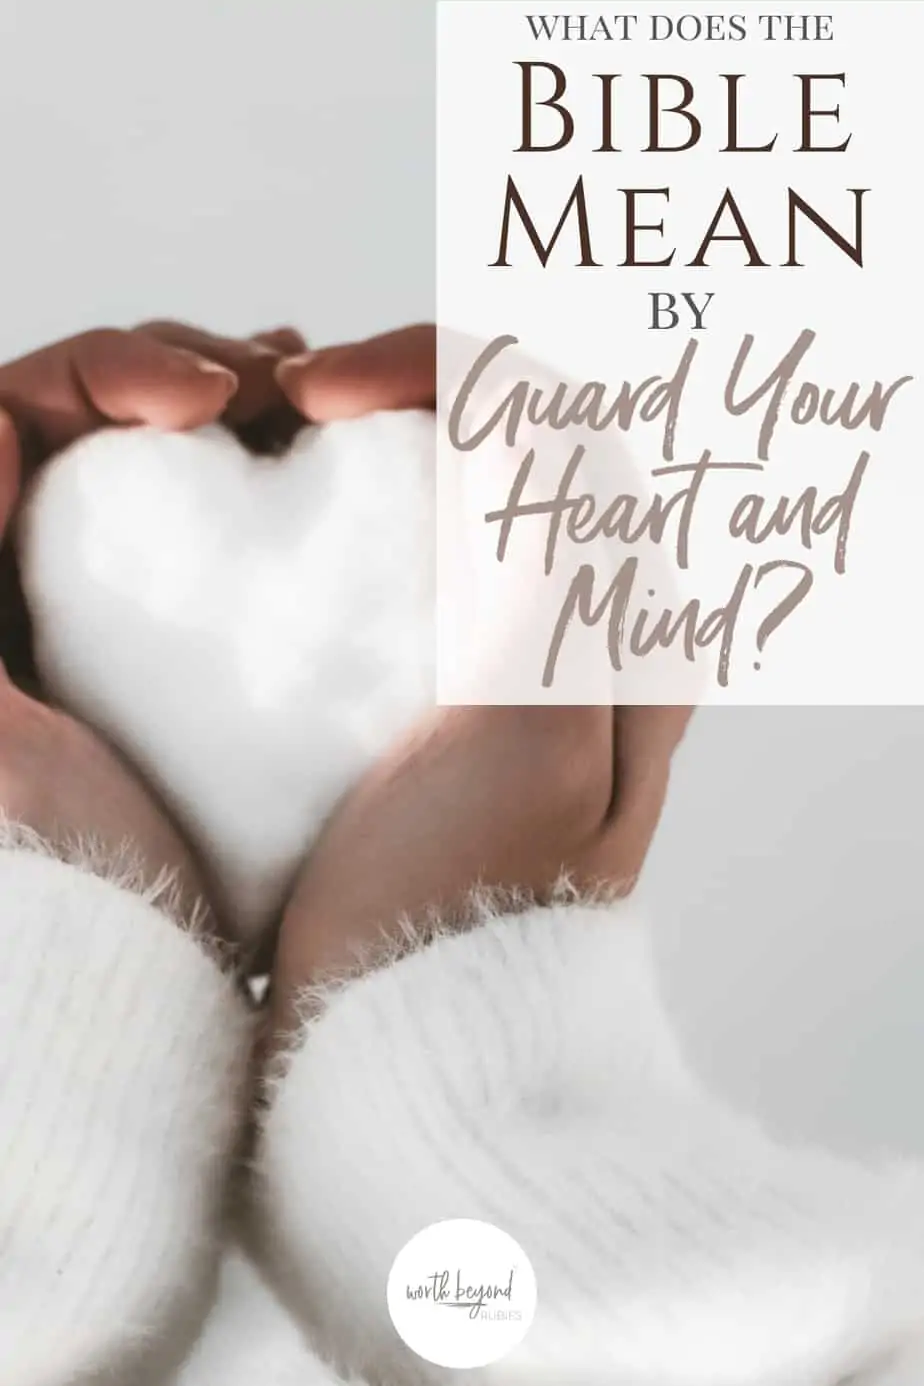 A black woman's hands and sleeves of a white sweater holding snow shaped like a heart and text that says What Does the Bible Mean by Guard Your Heart and Mind?